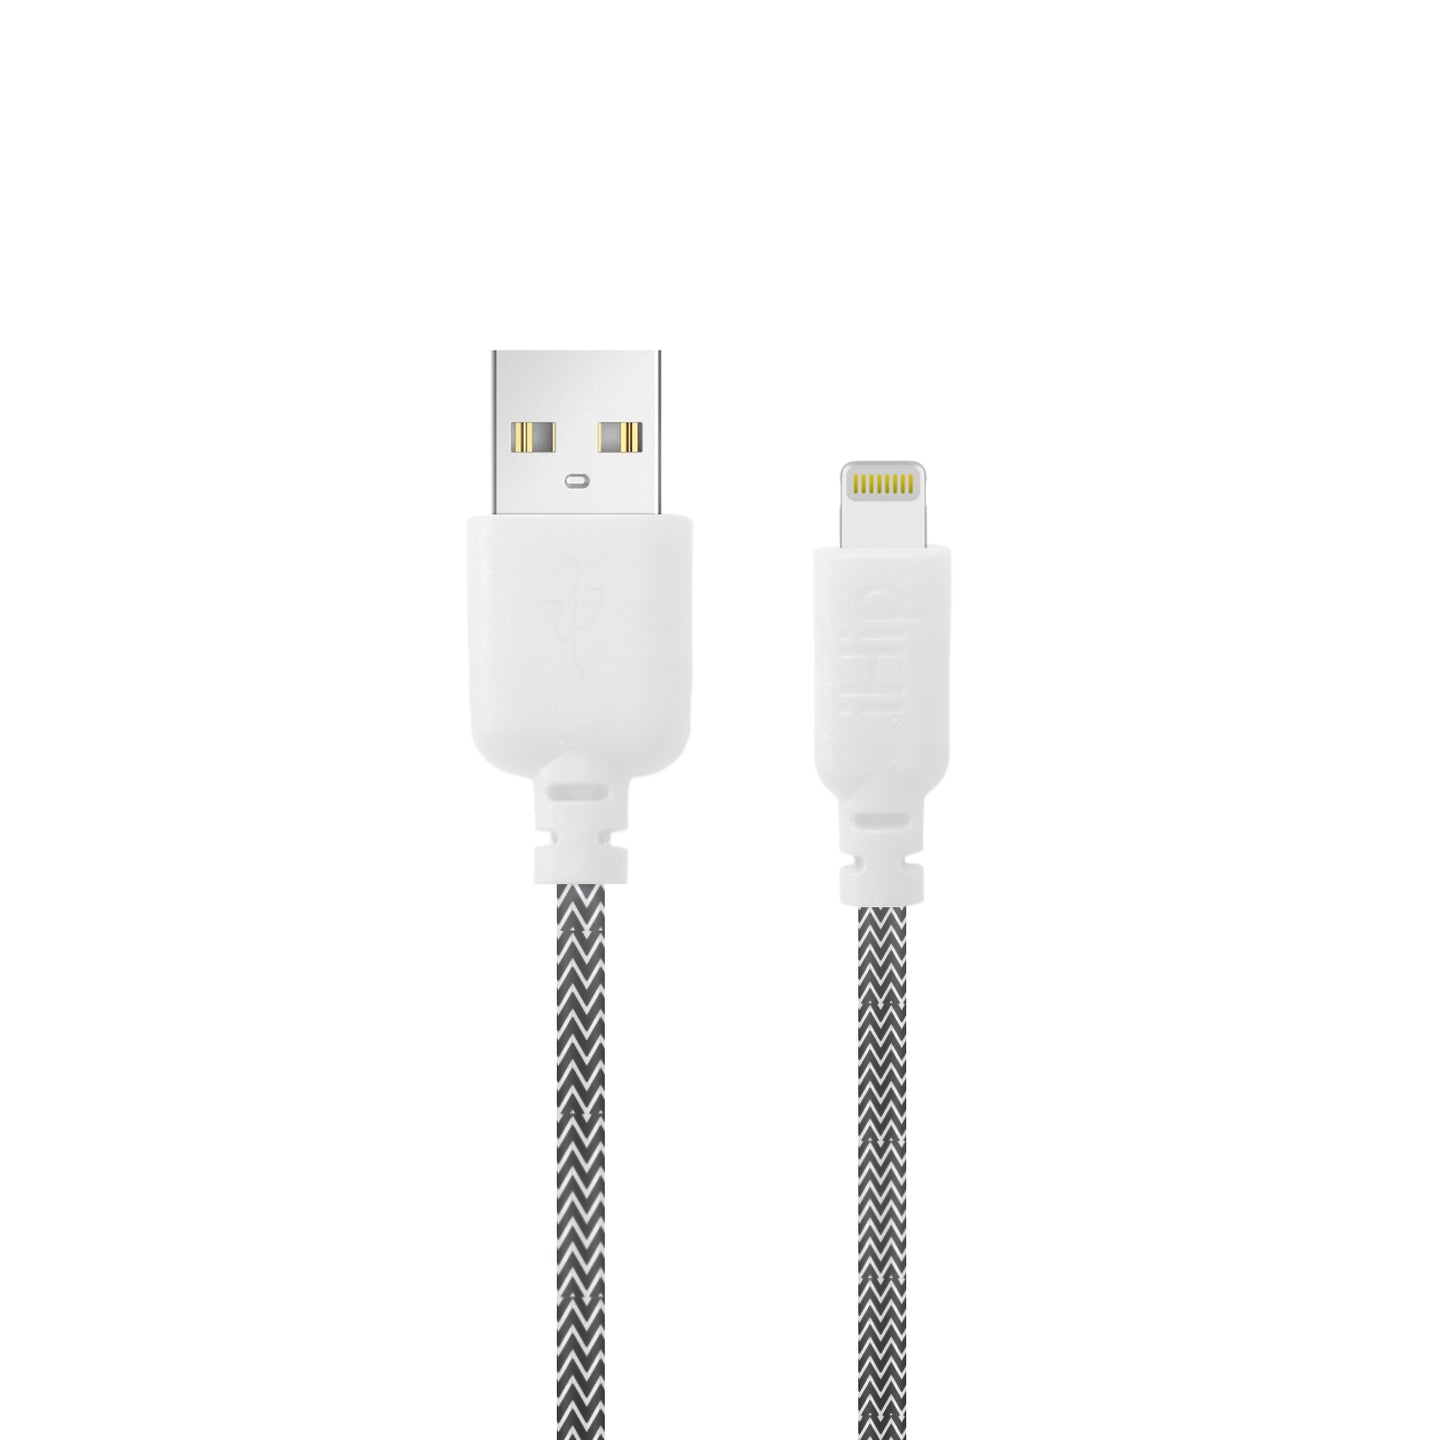 iHip Cute Cords 10ft  Black & White Braided MFI Lighting USB Sync Cable Bend Test Certified - iPhone Charger Cable for iPhone/ iPad /iPod - iHip